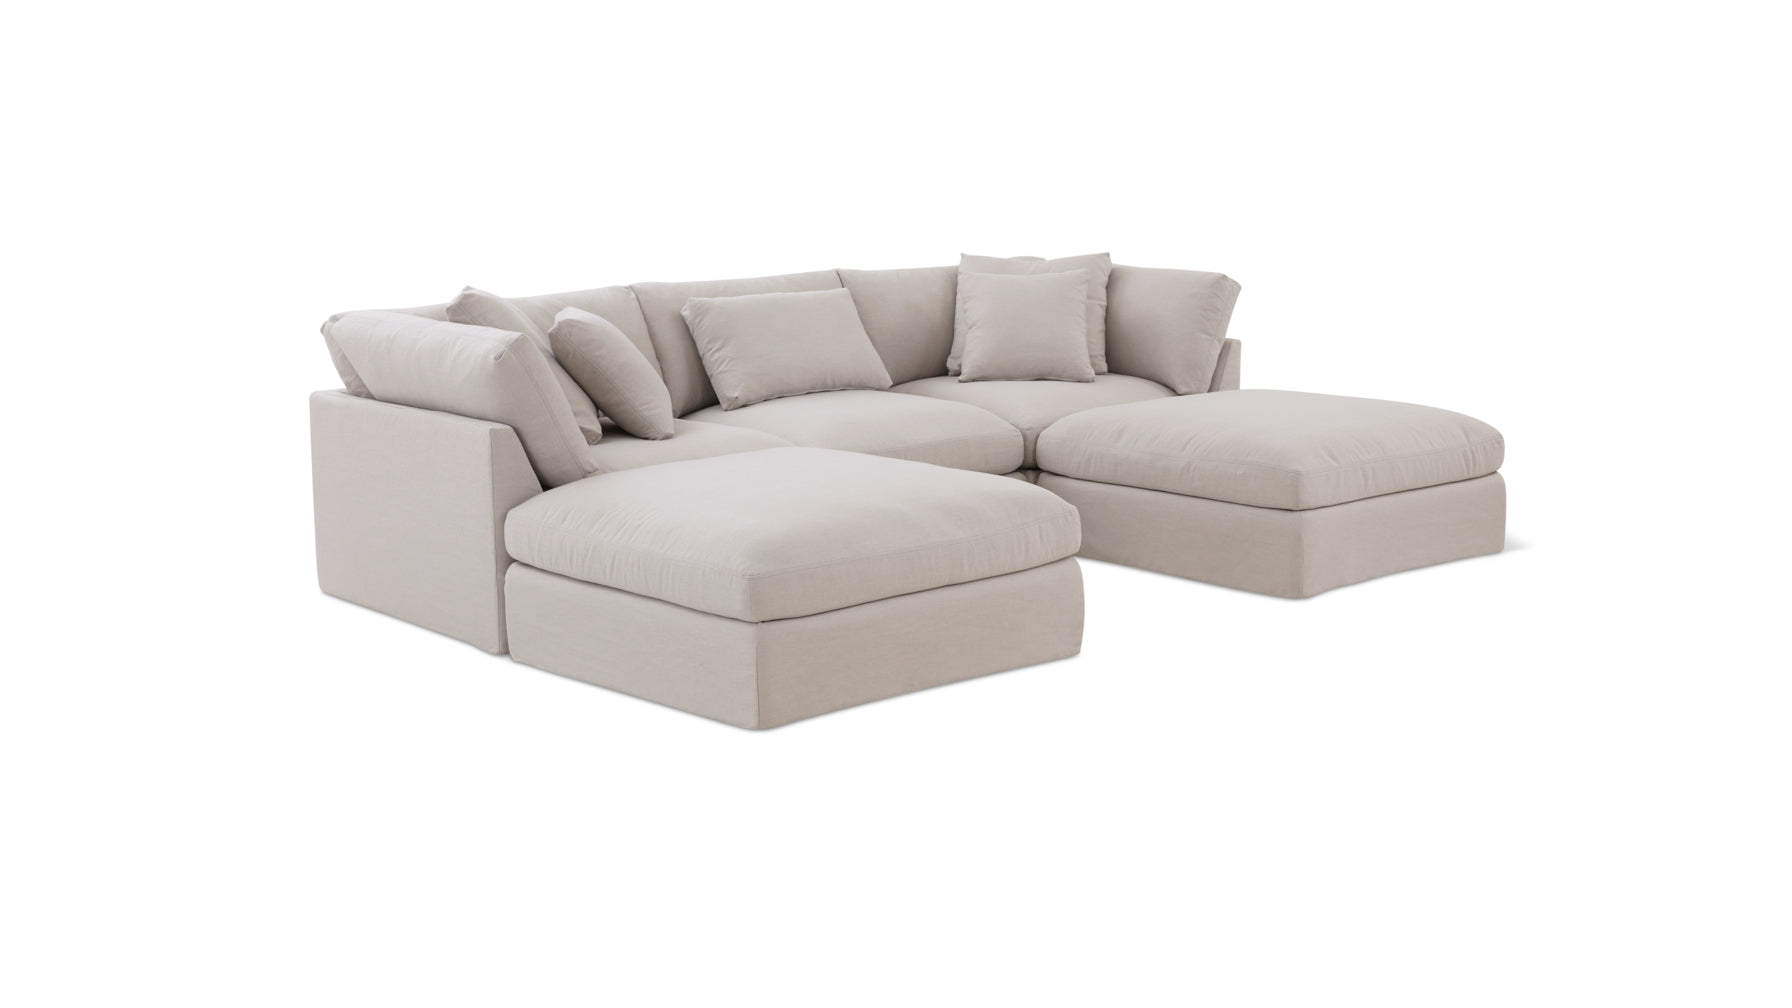 Get Together™ 5-Piece Modular U-Shaped Sectional, Large, Clay - Image 2